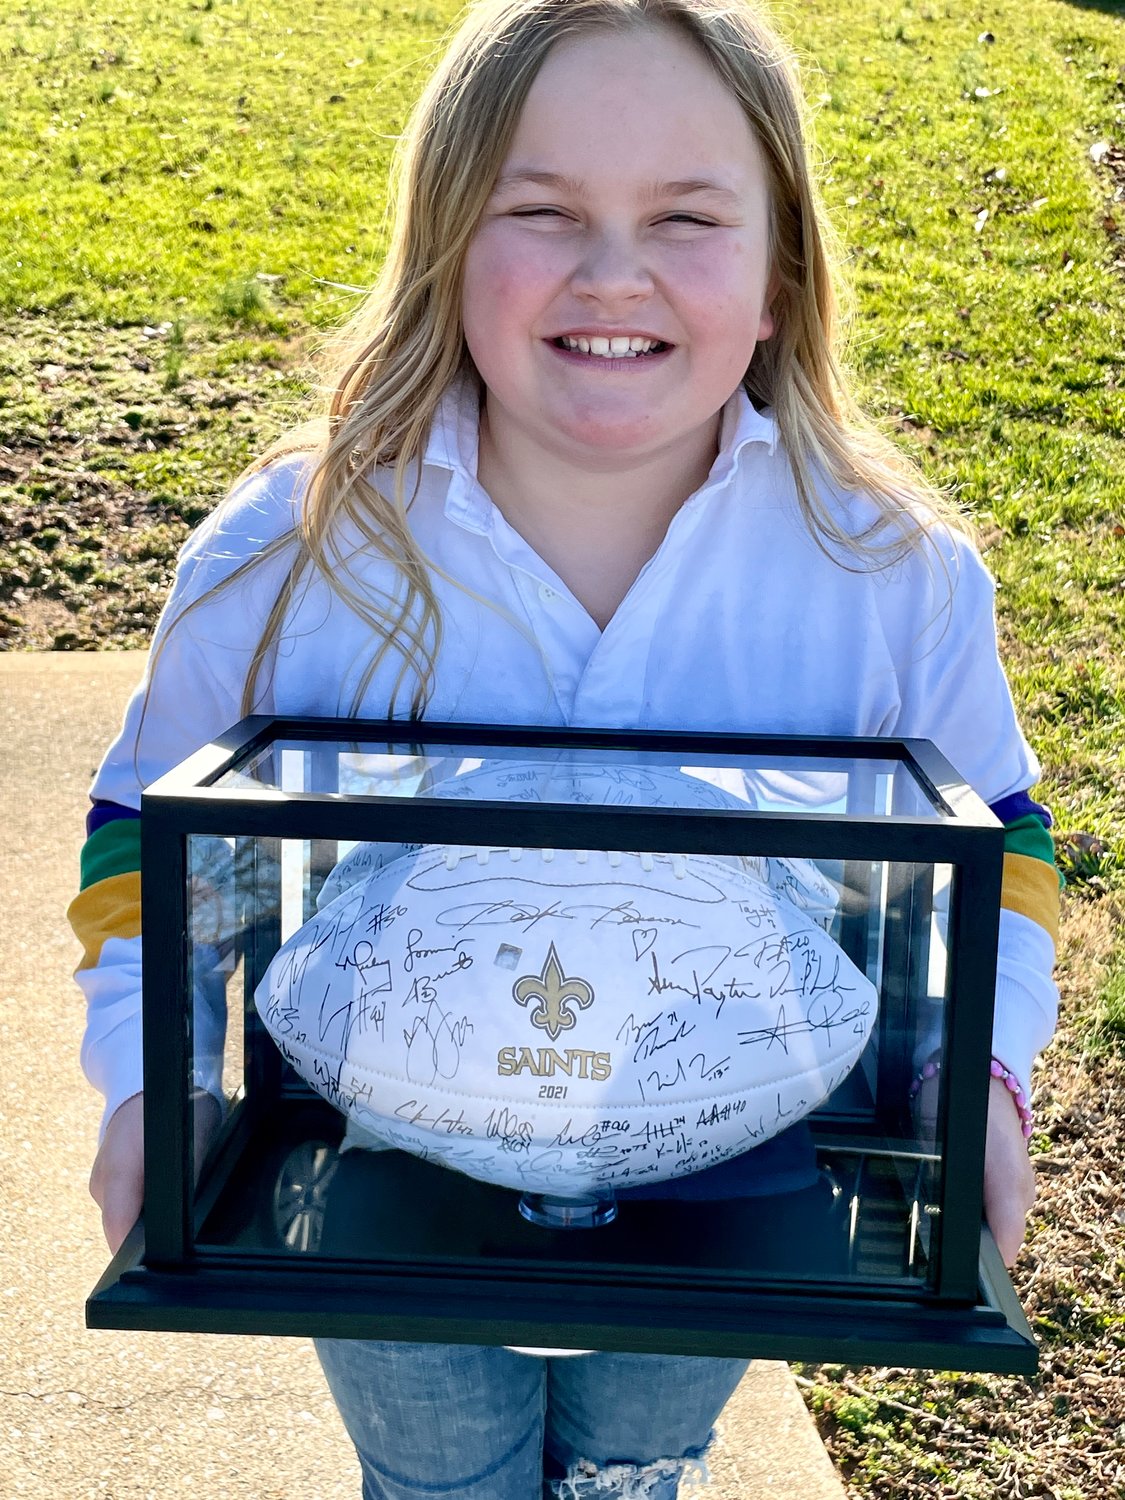 Izzy Sherman got a football from the New Orleans Saints.